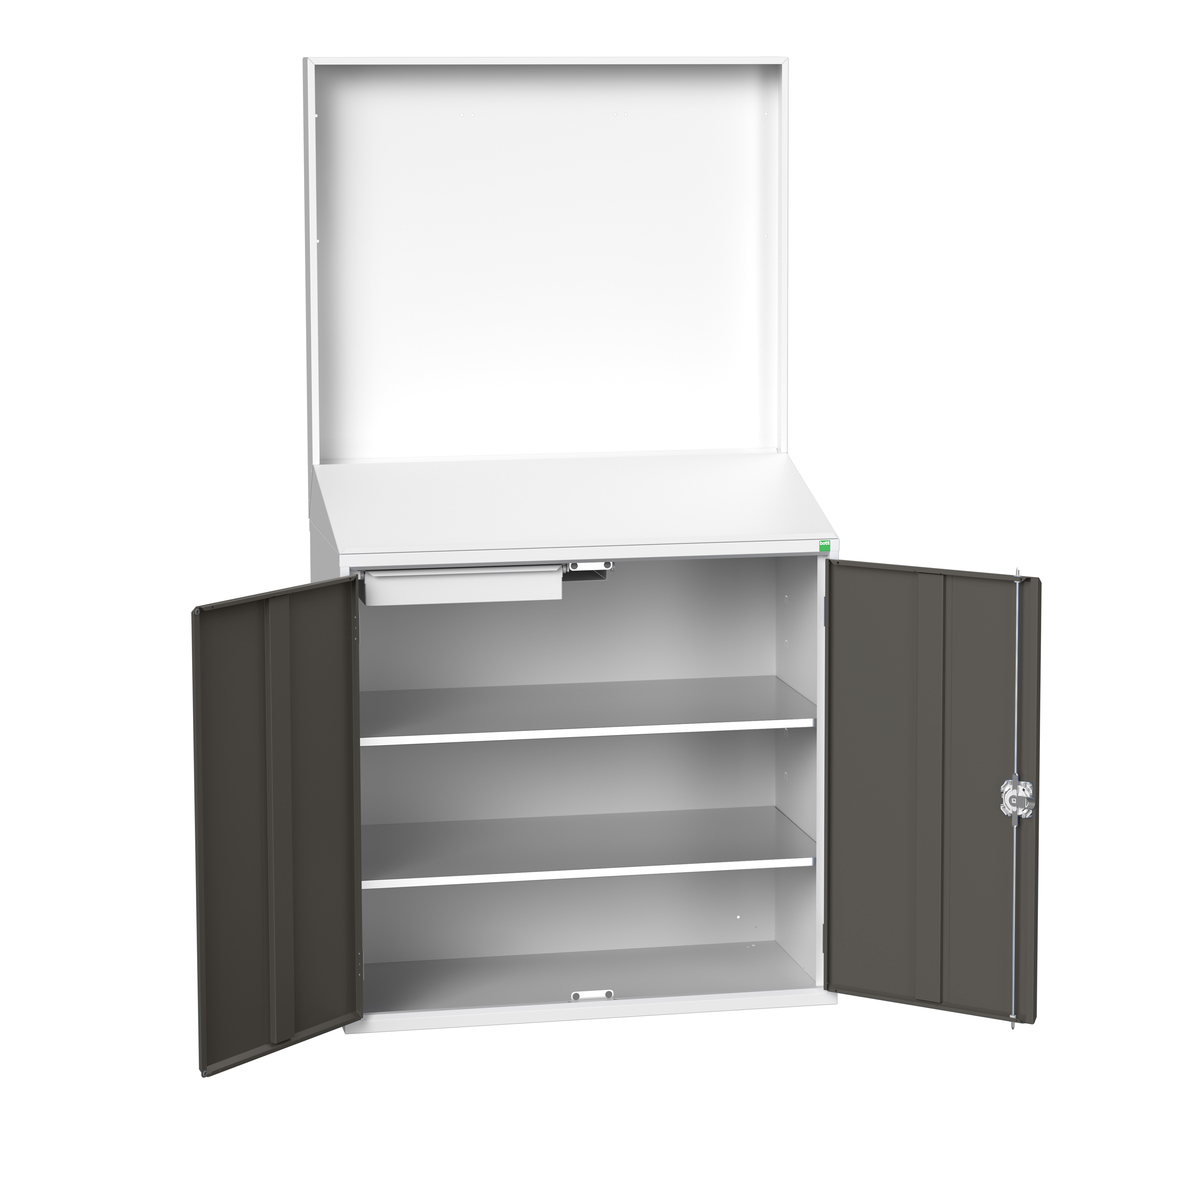 16929217.19 - verso economy lectern with backpanel